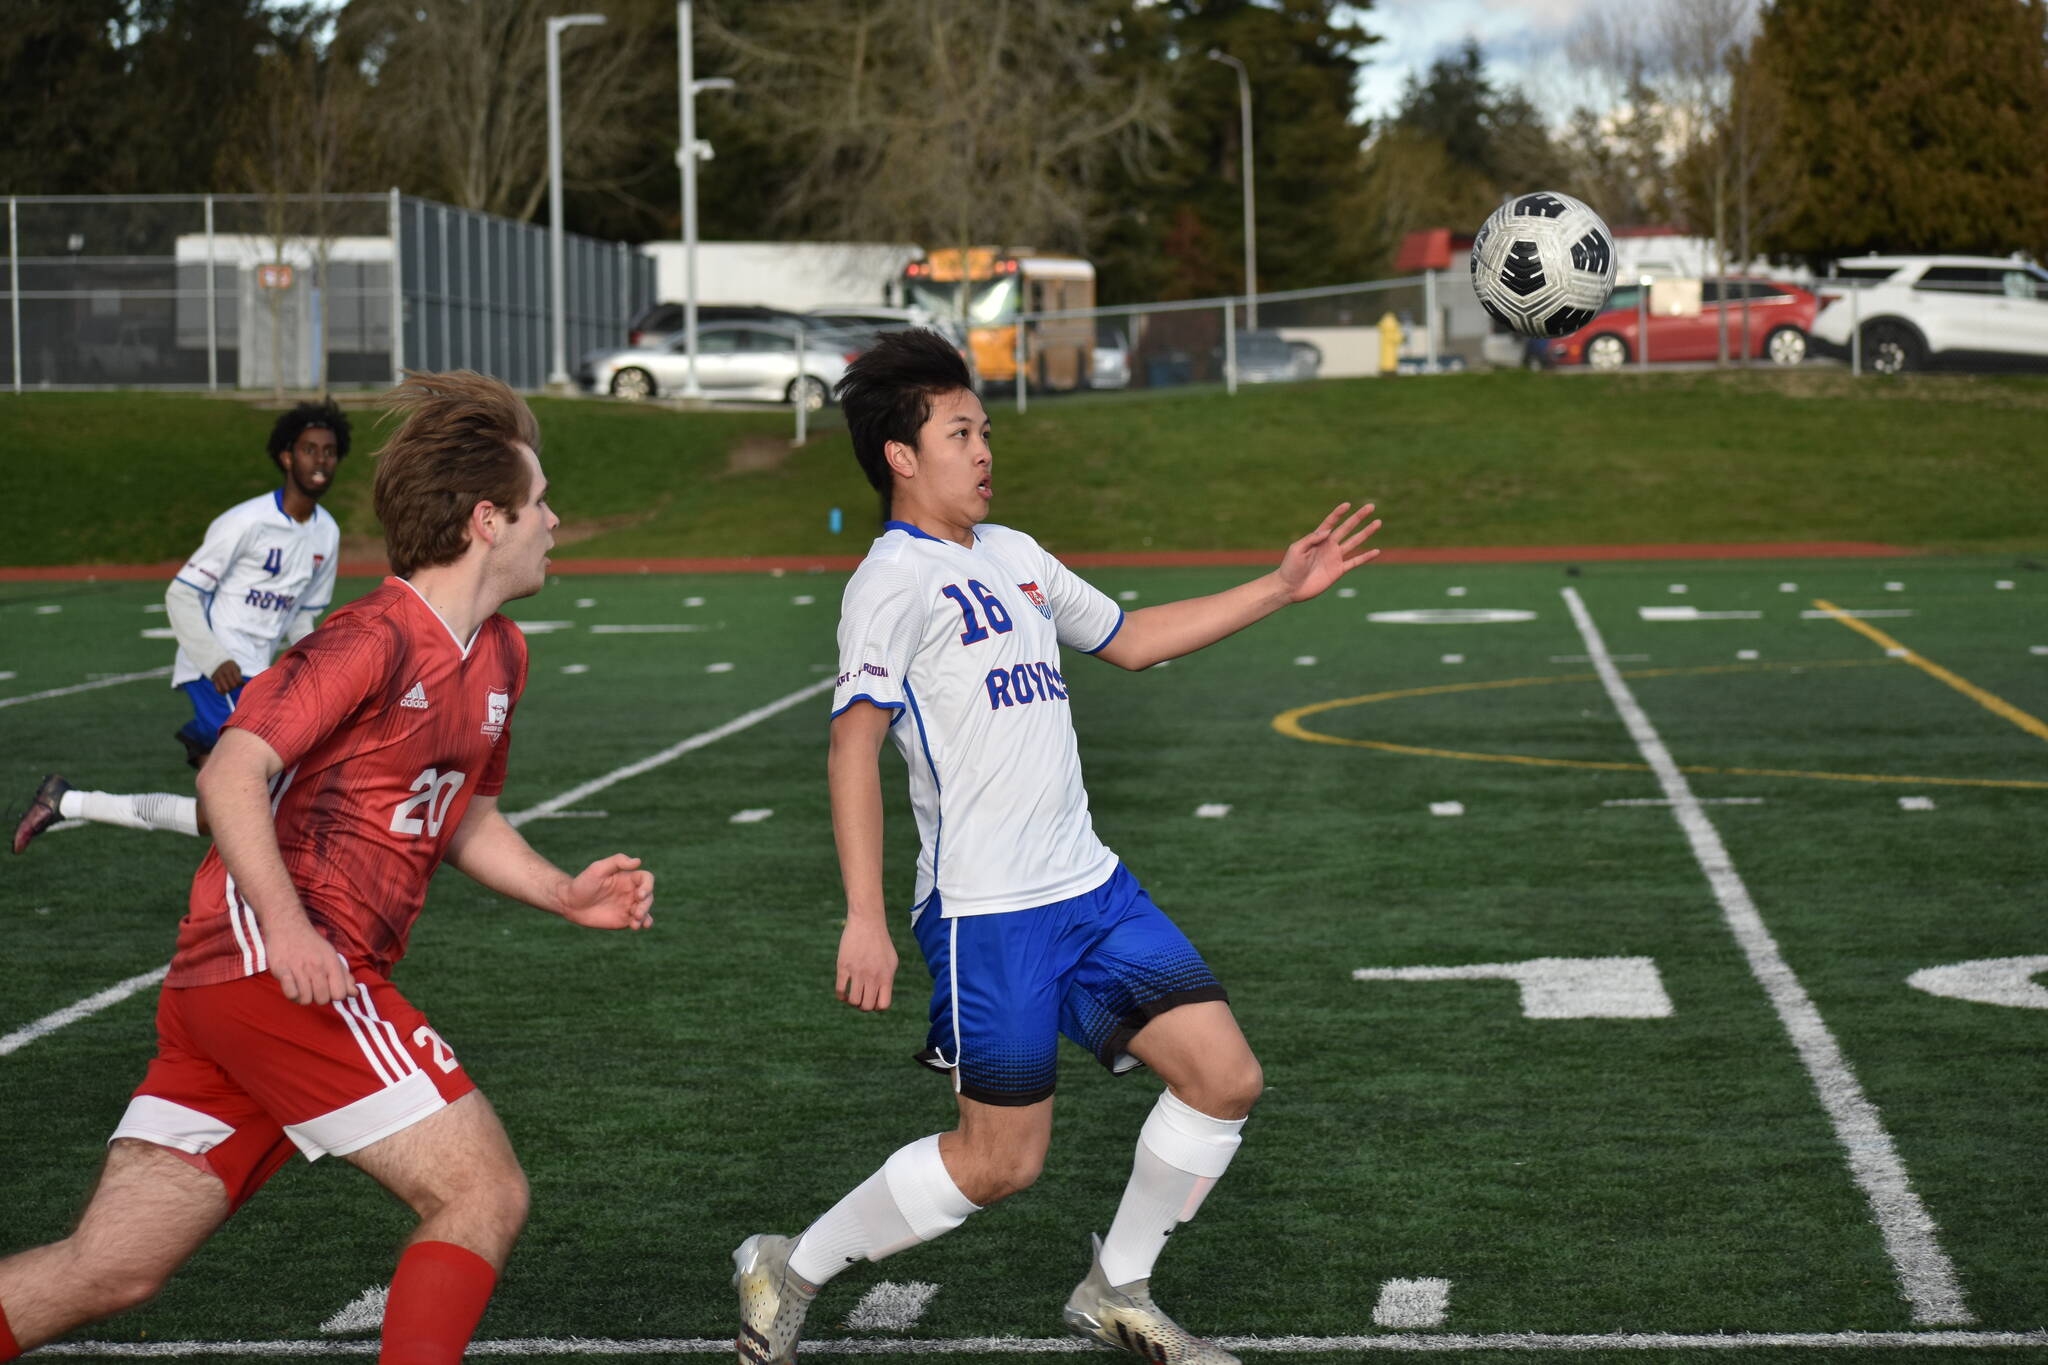 Royal junior Joshua Chansee eyes down the ball as a Raider closes in on him. Ben Ray / The Reporter